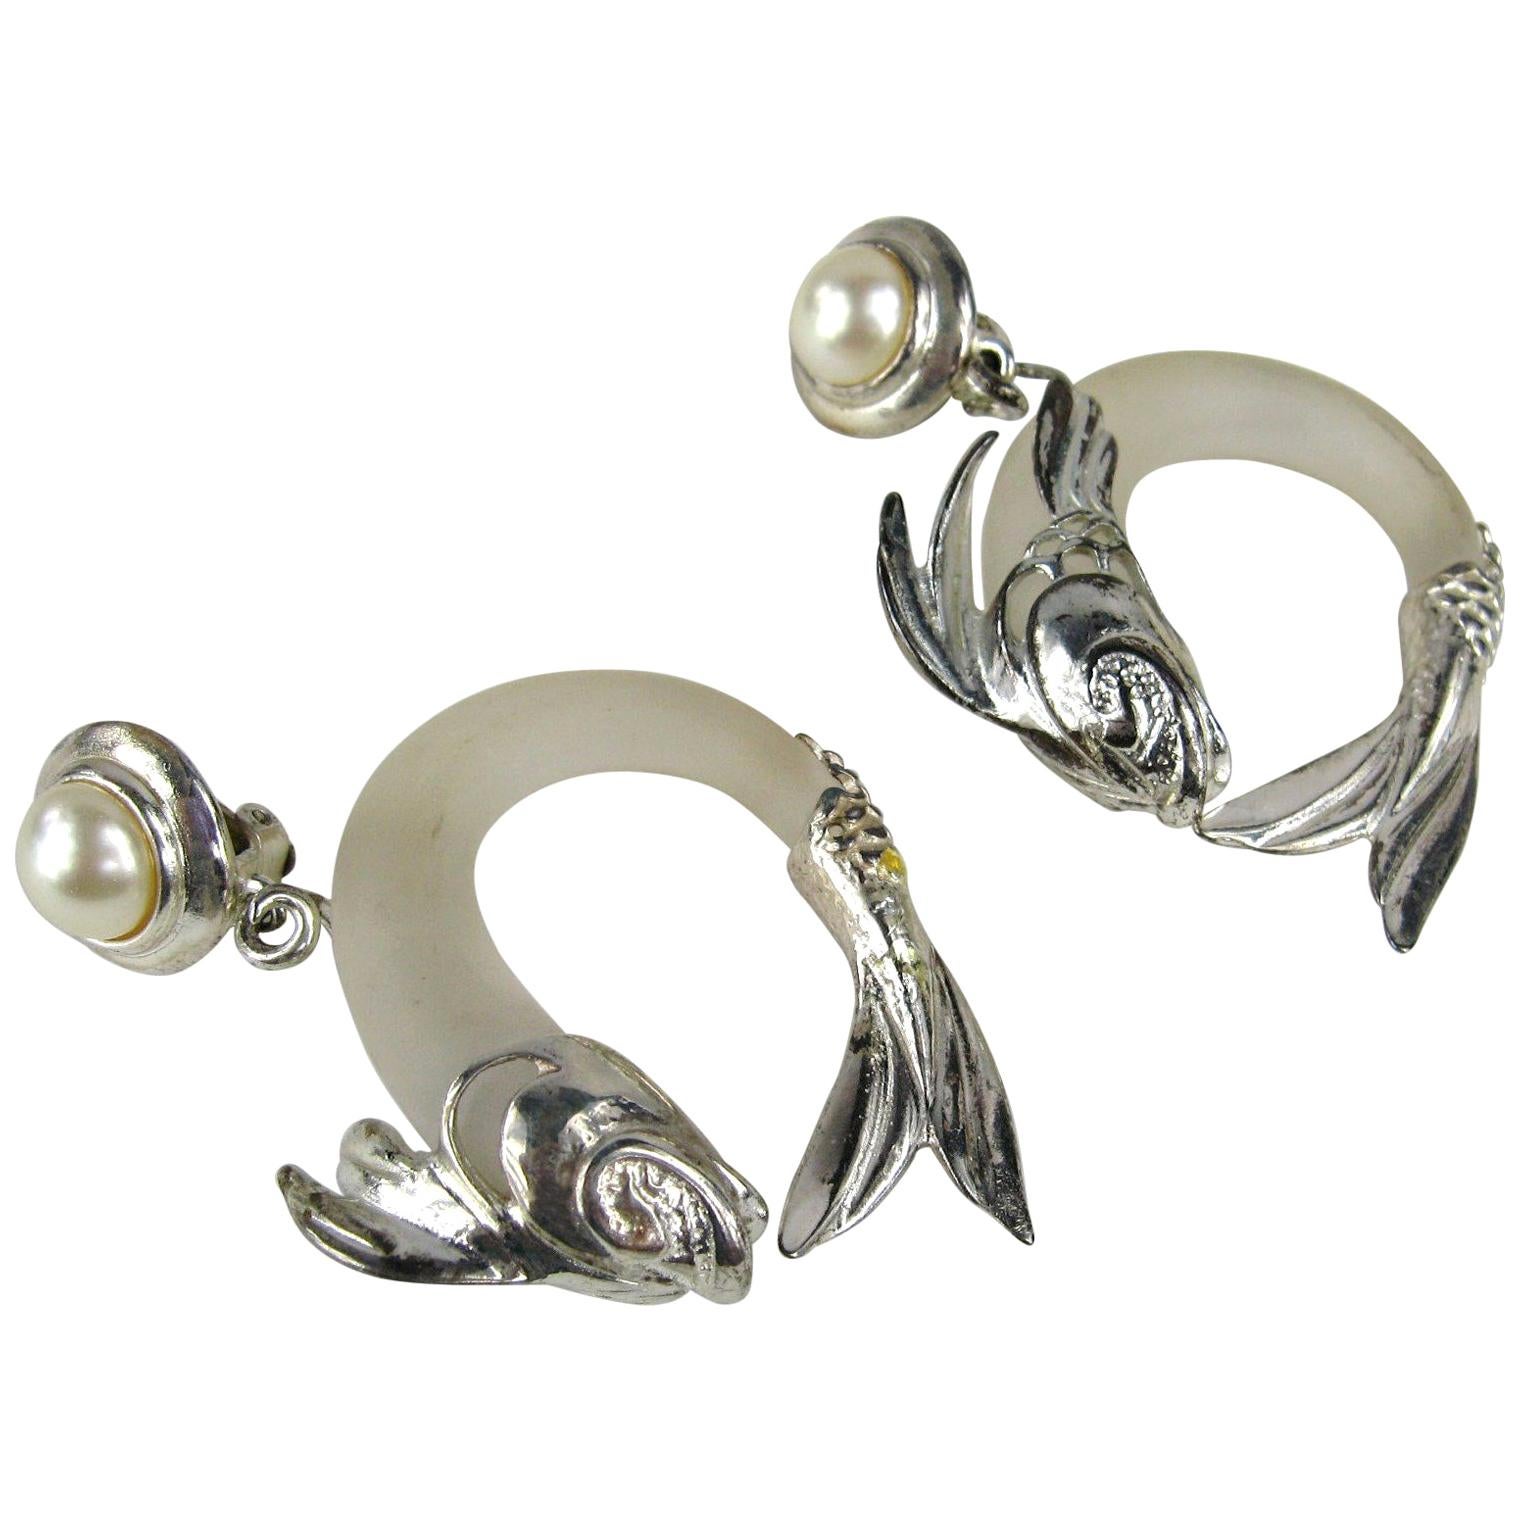  Inna Cytrine Lucite Silver fish Dangle Earrings New, Never Worn -1980s For Sale